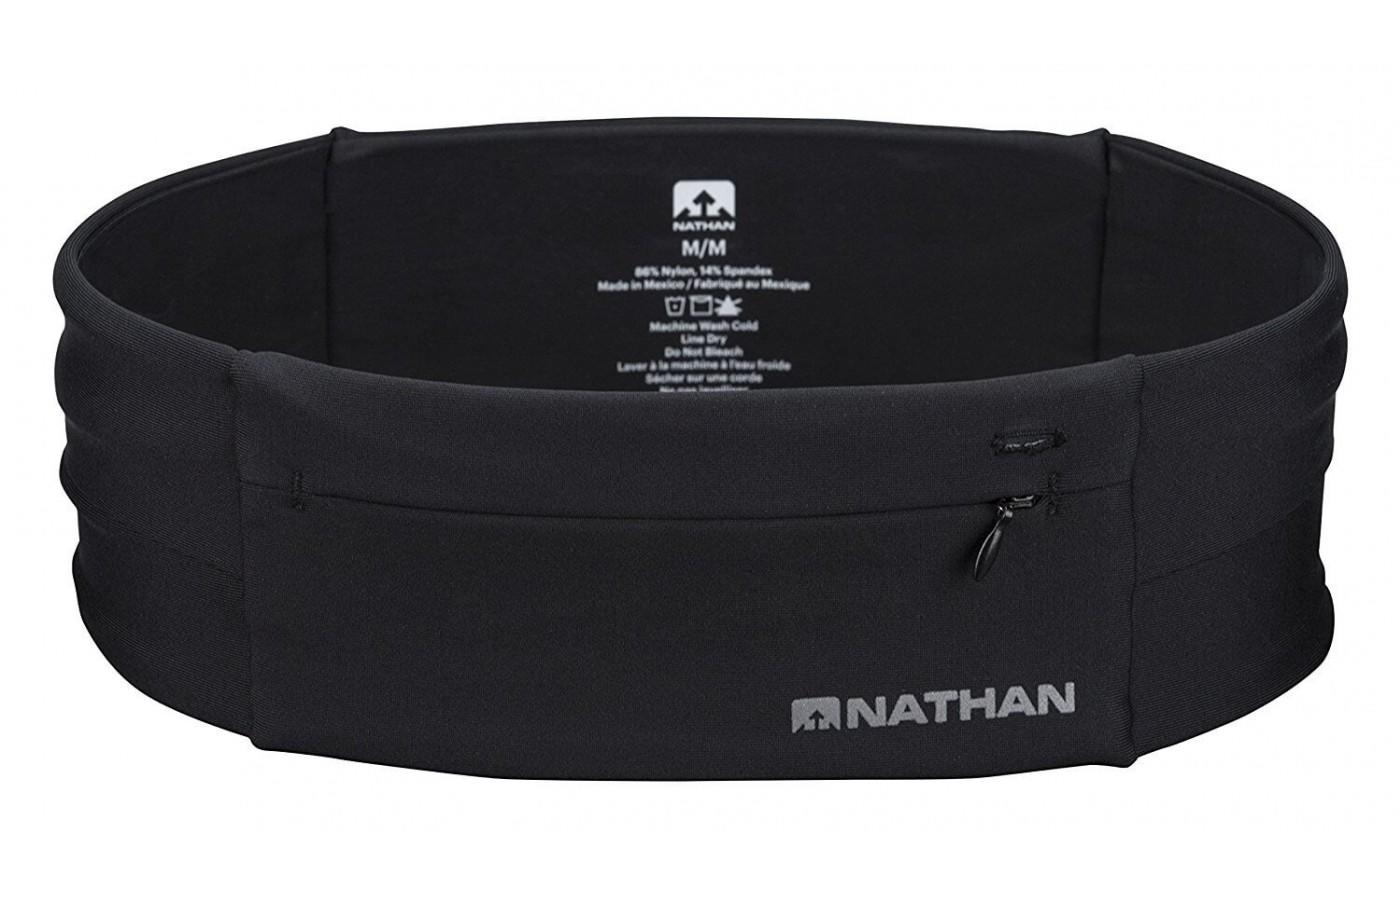 The Nathan Zipster Belt is made of stretchy fabric